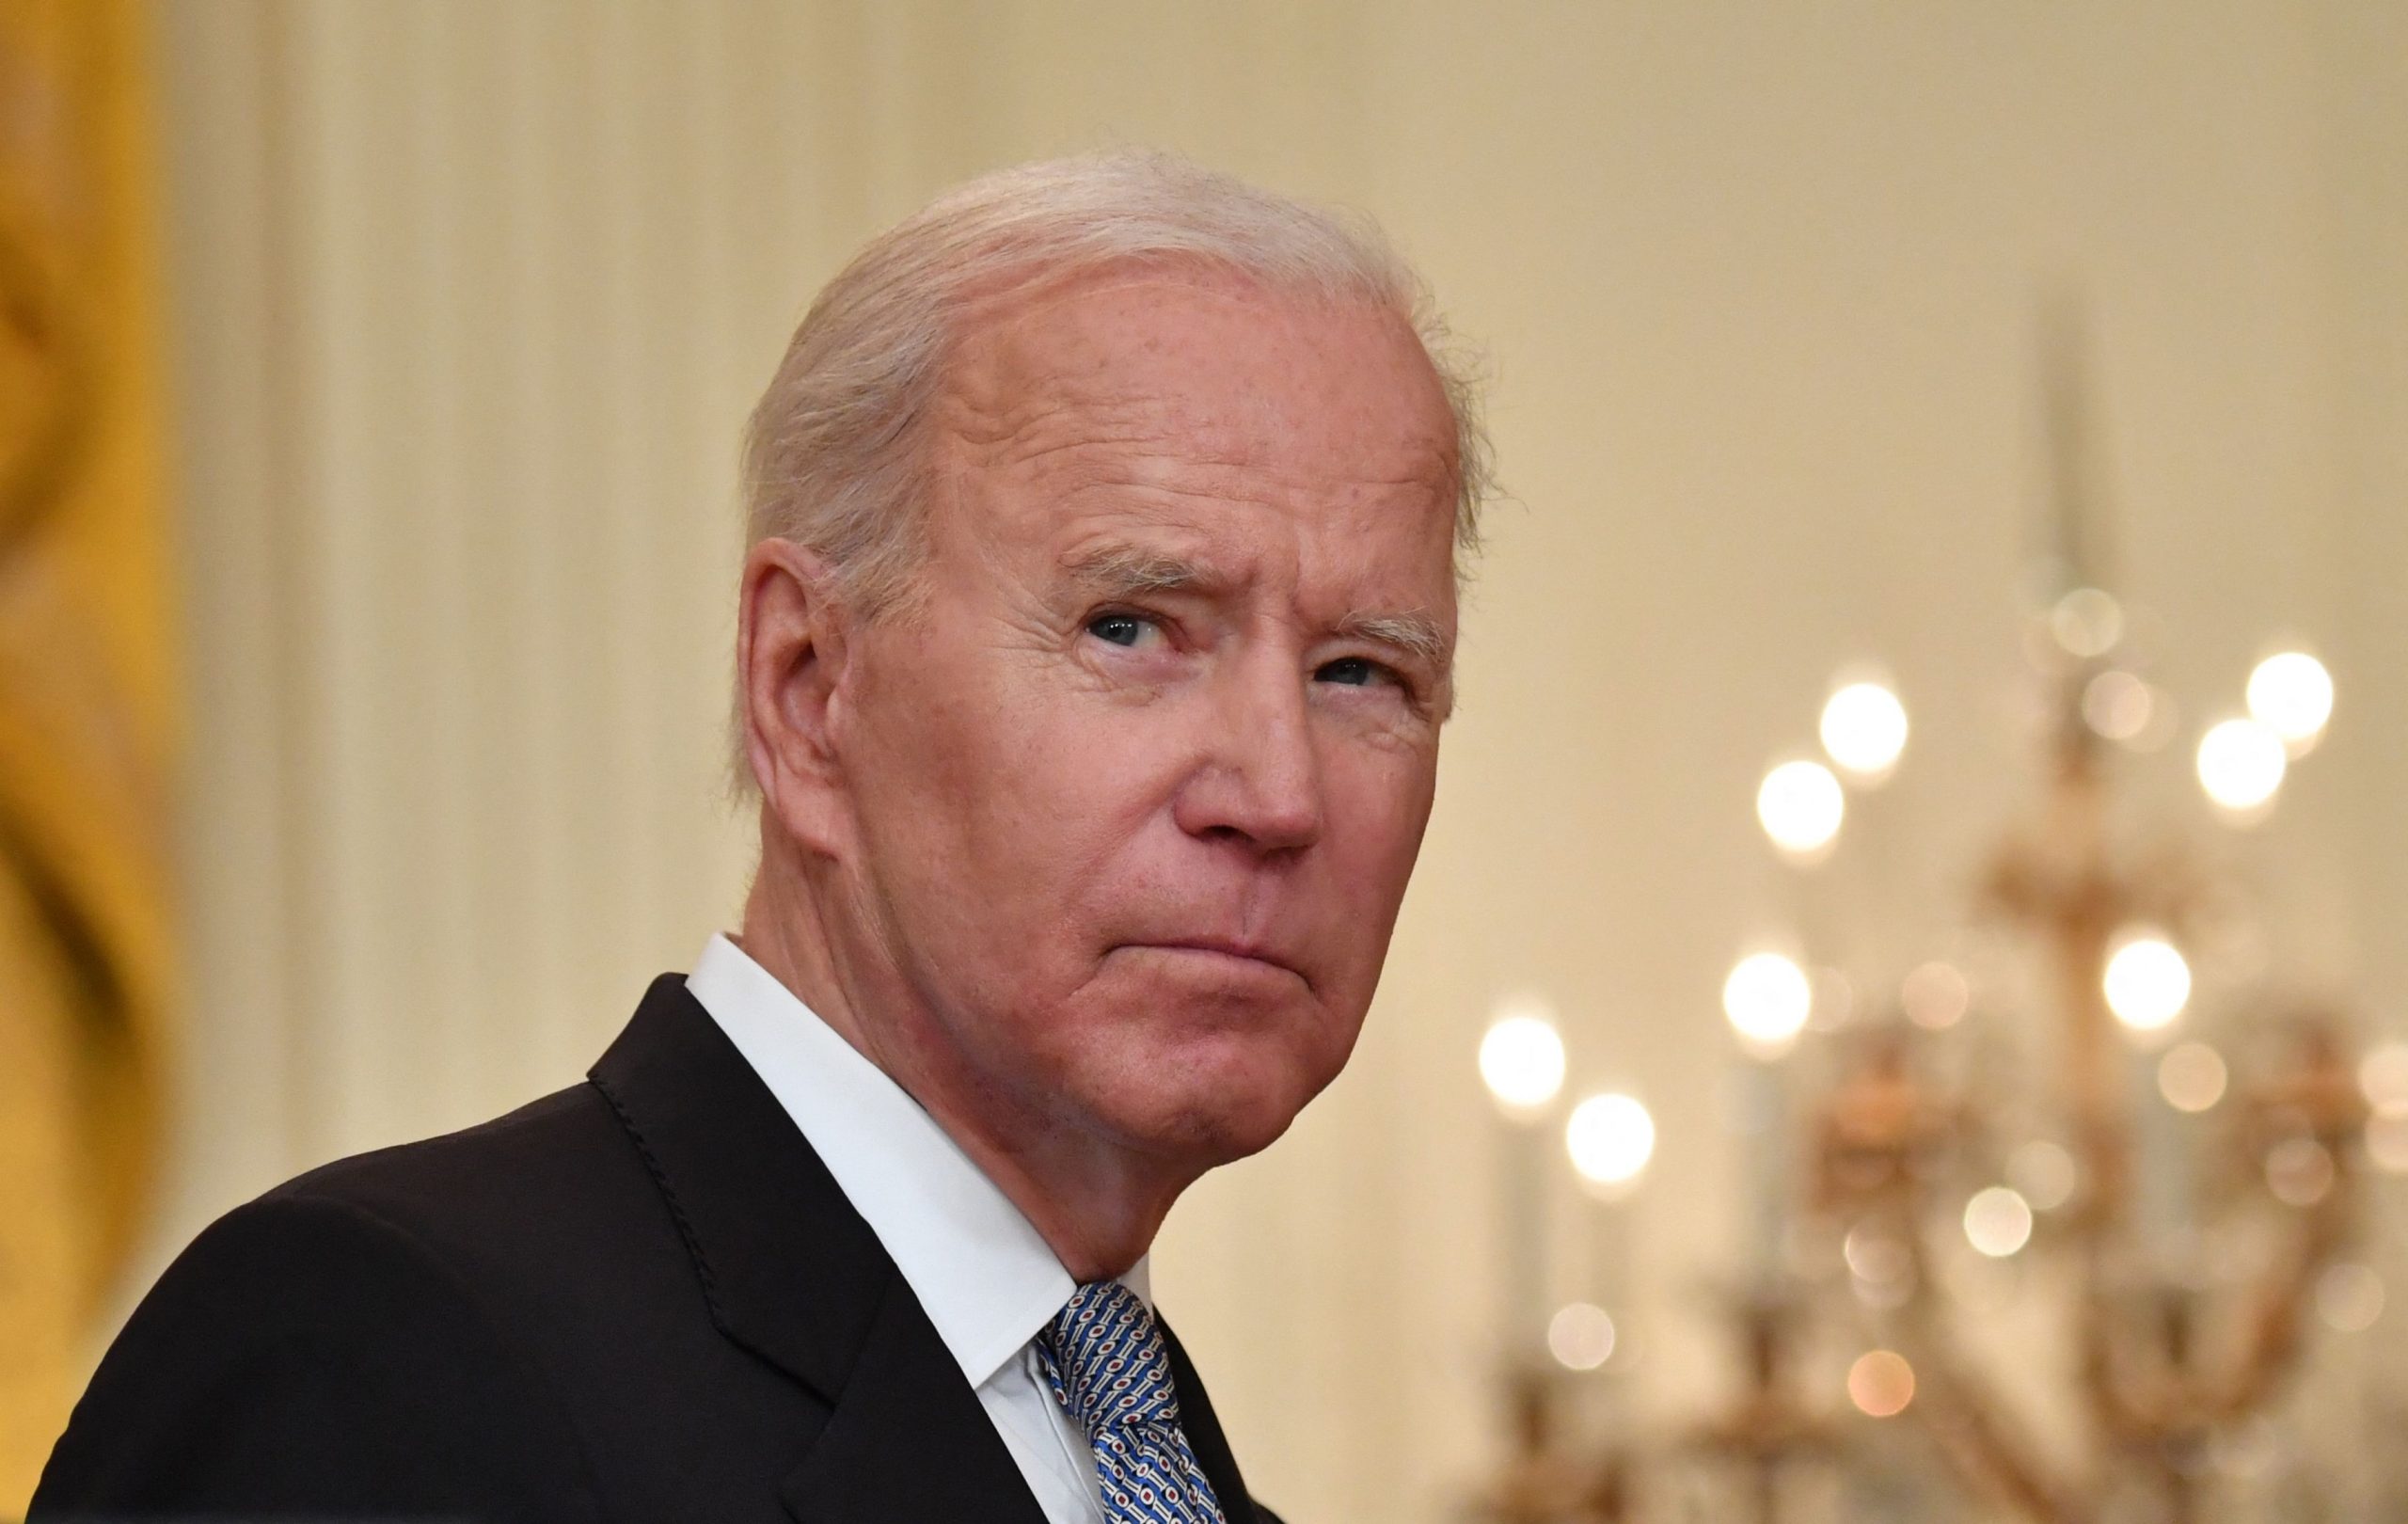 close-up view of Joe Biden's face showing stern expression